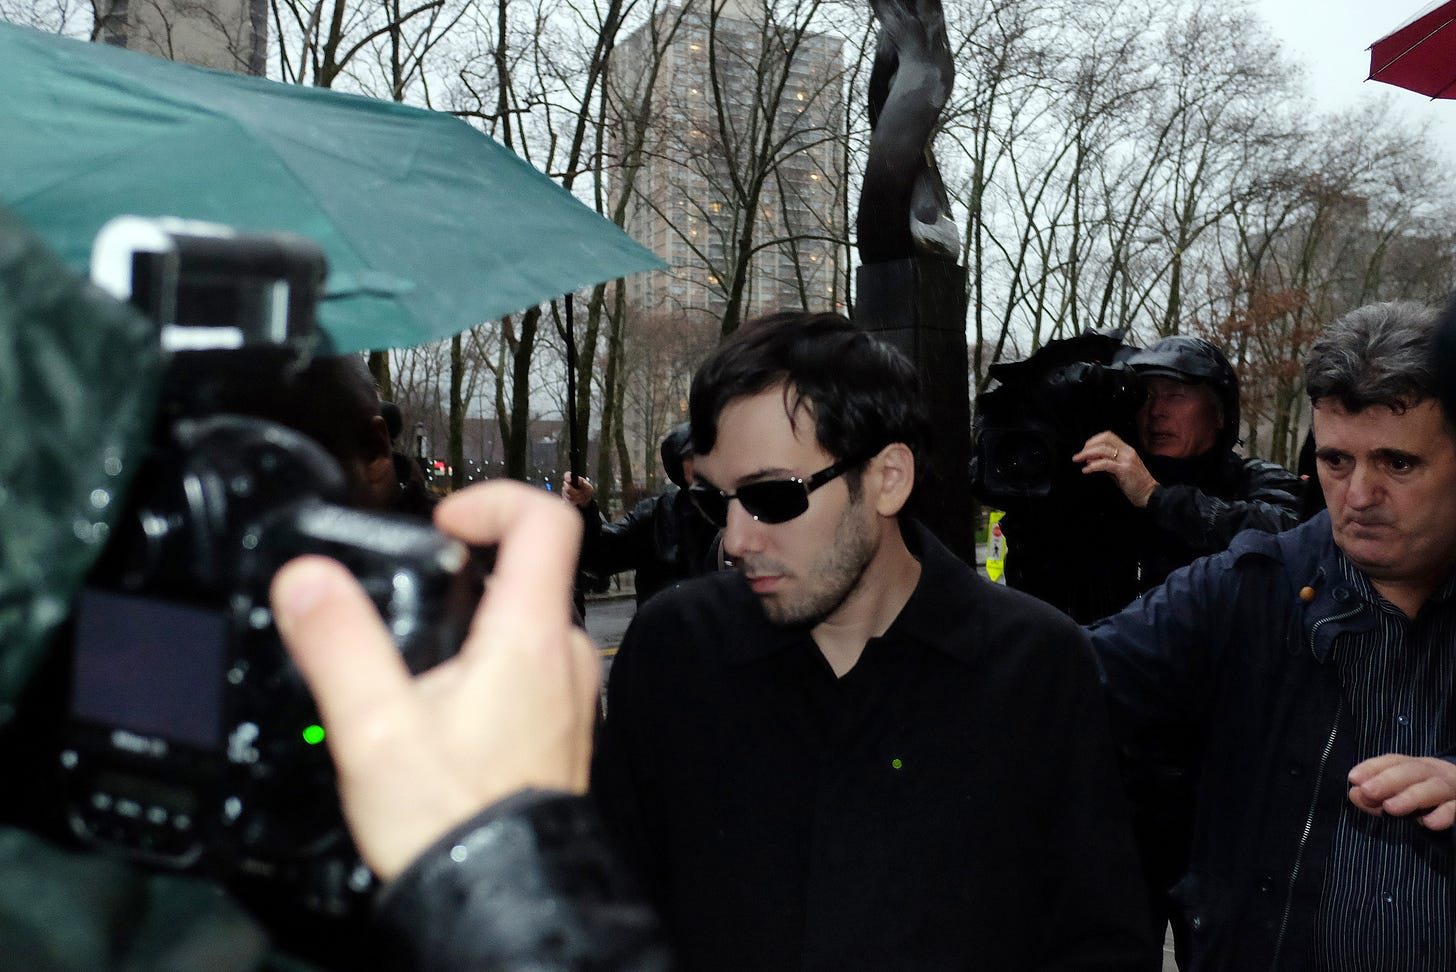 Martin Shkreli walks through a swarm of journalists as he leaves the courthouse after his arraignment. His father is standing just behind him.